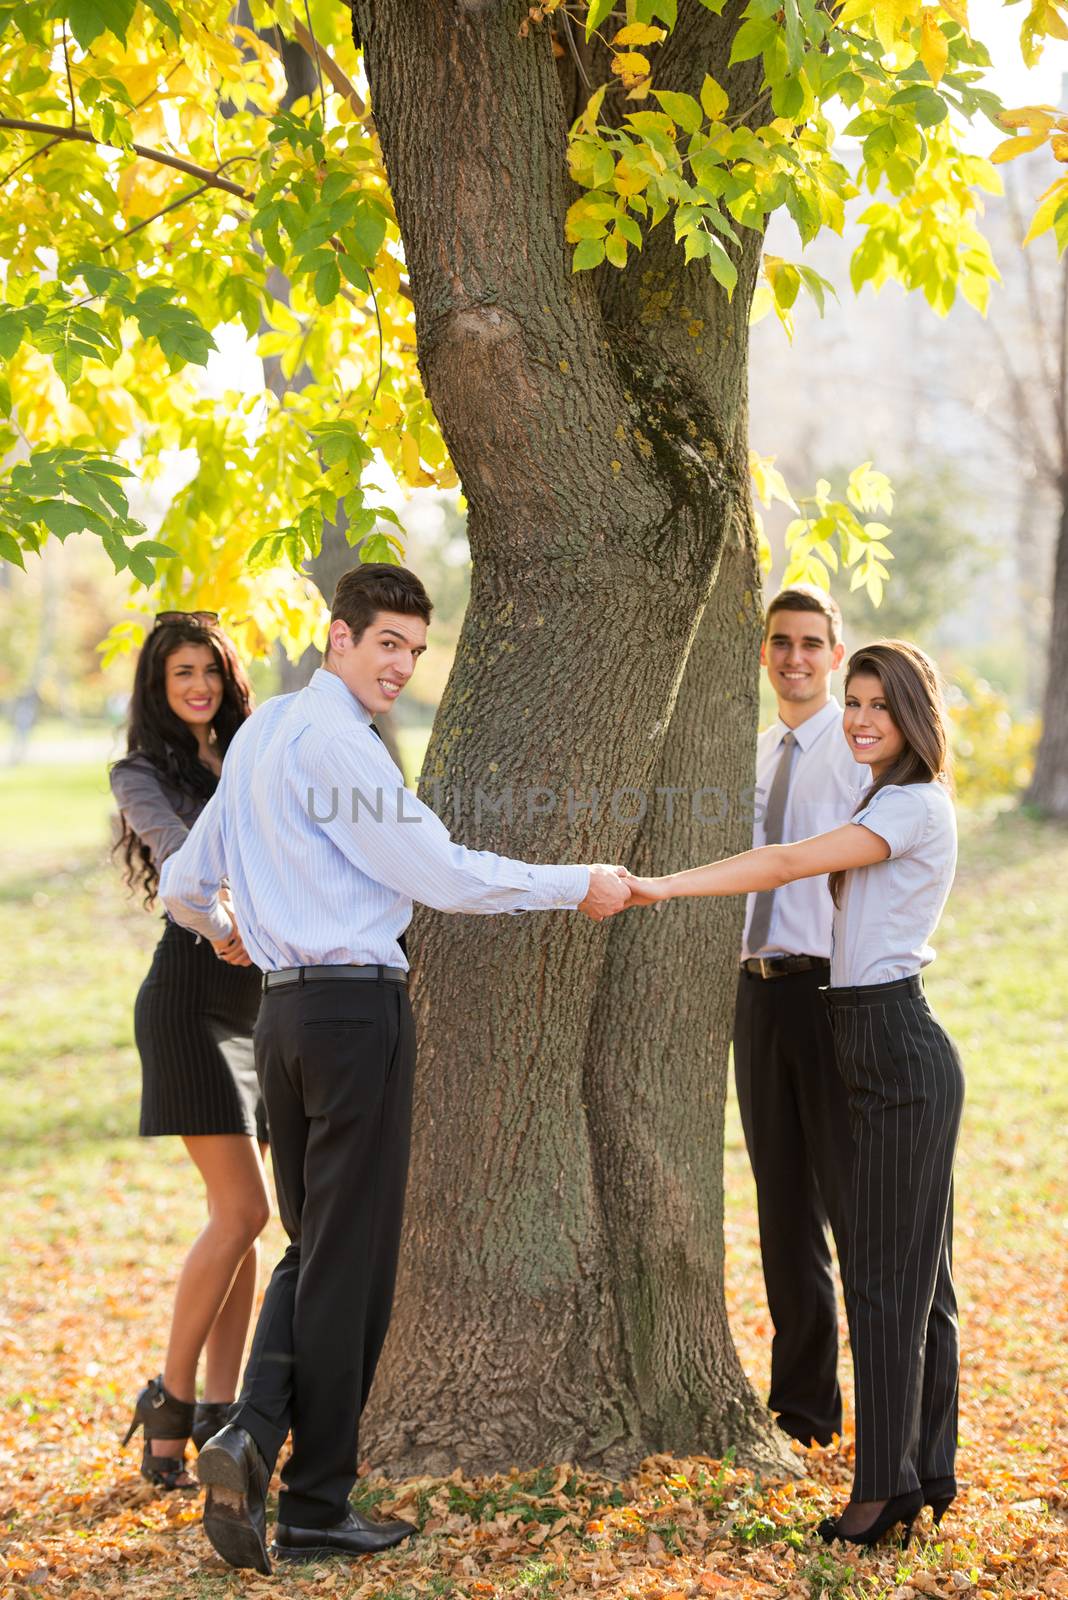 Group of young business people standing in a park hugging a tree trunk.